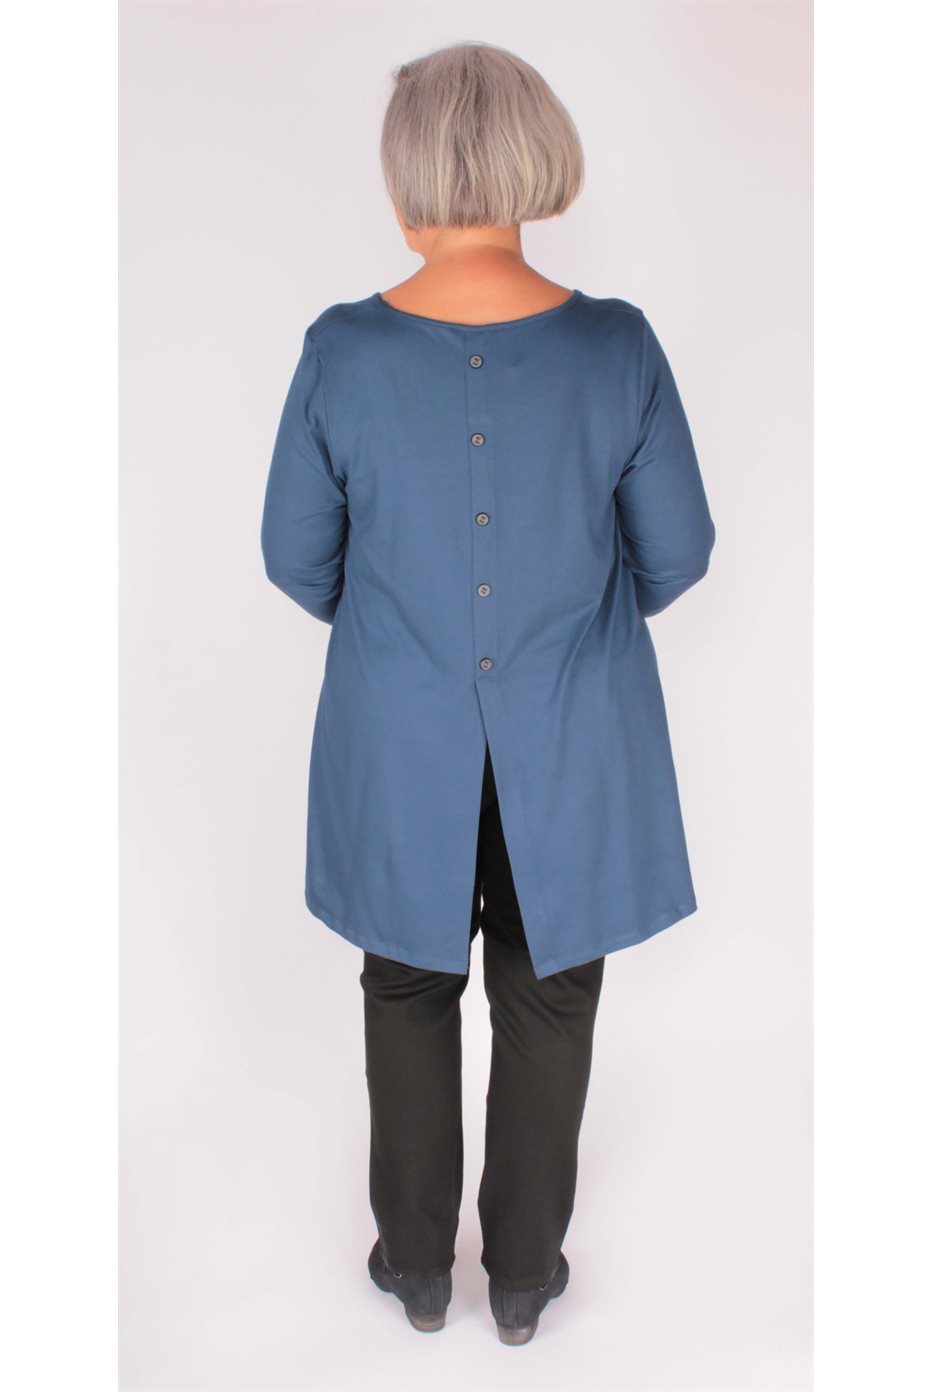 Blue Tunic with Pocket